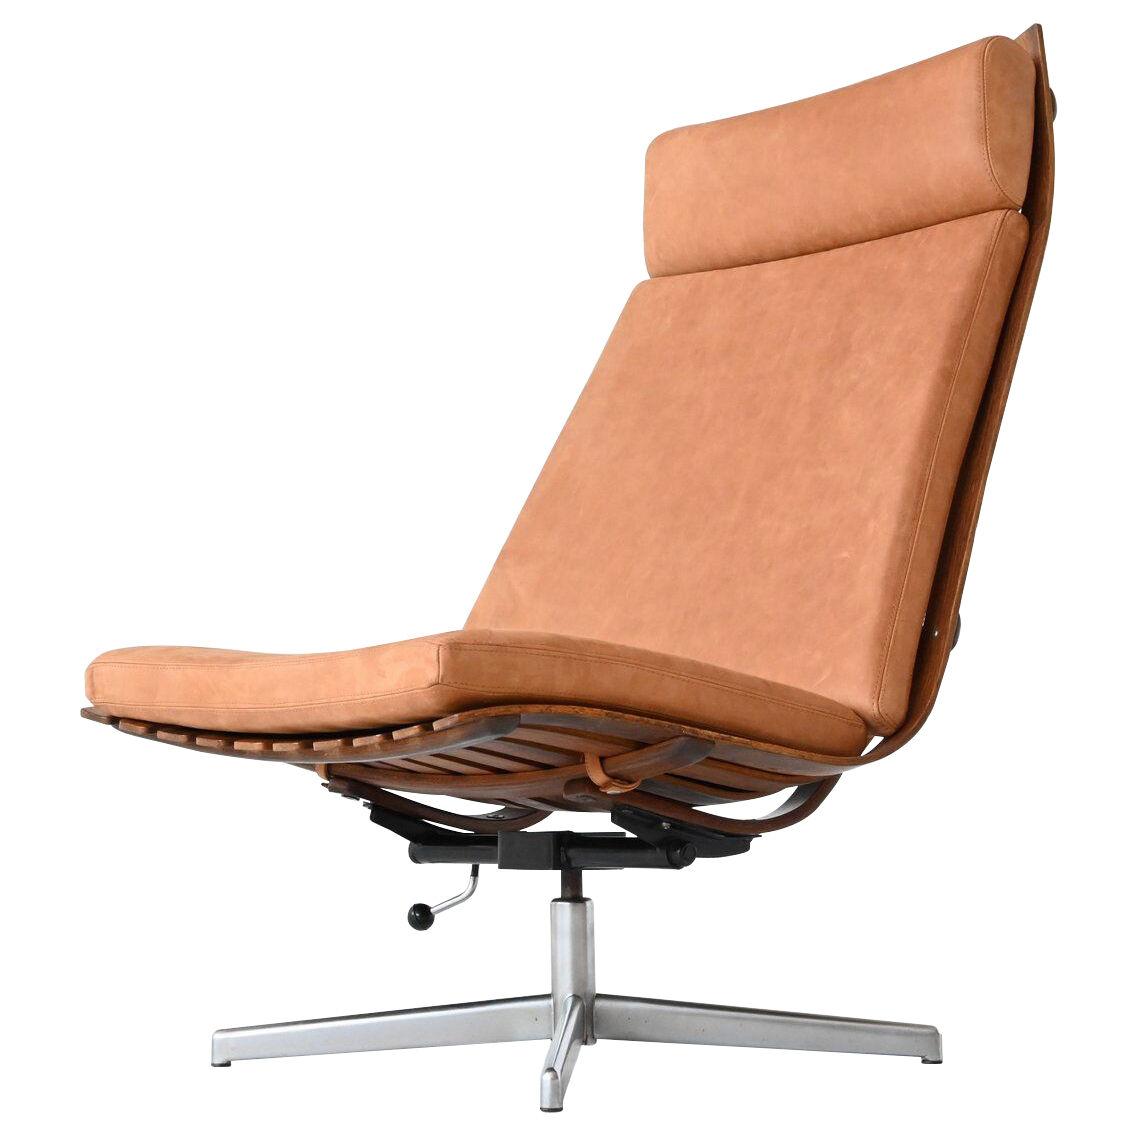 Hans Brattrud Scandia swivel lounge chair Hove Mobler Norway 1957